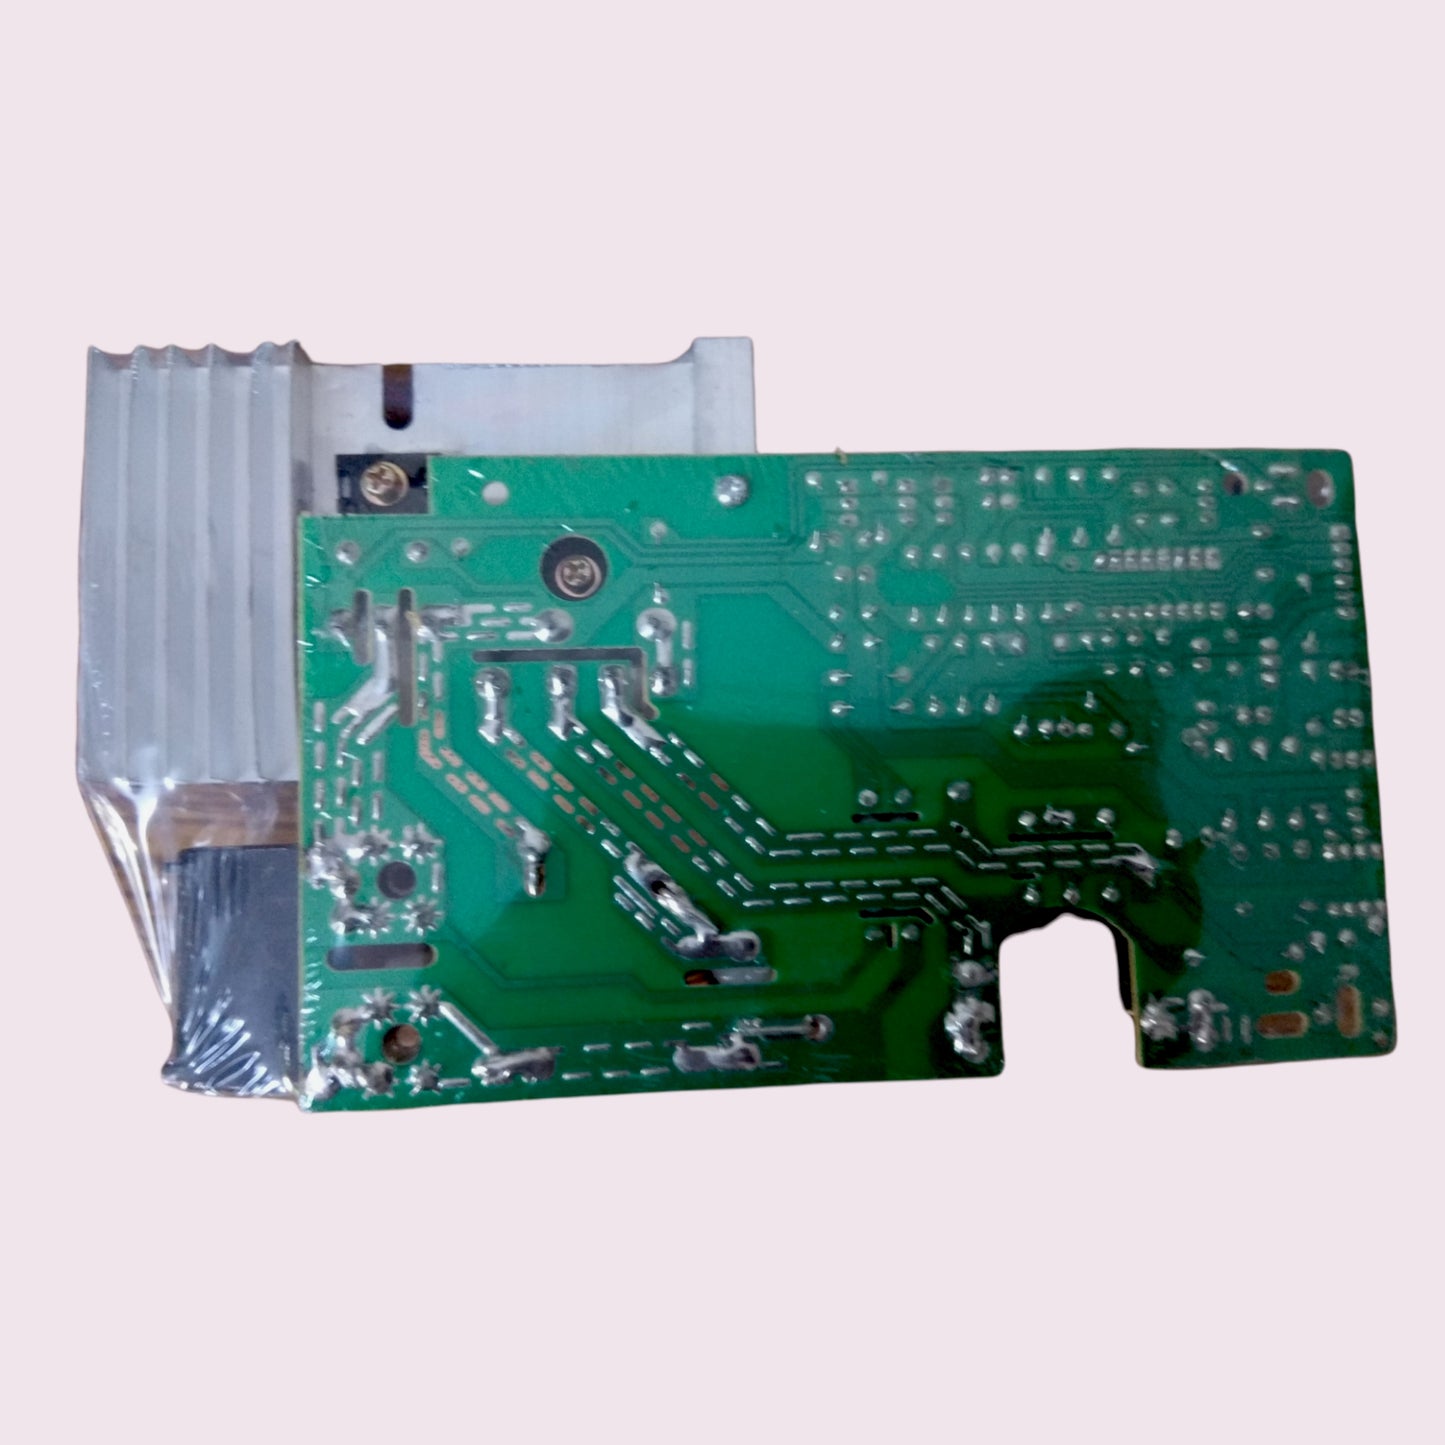 1800 Watts Universal Intelligent Induction Cooker Board - General Maintenance Replacement Board